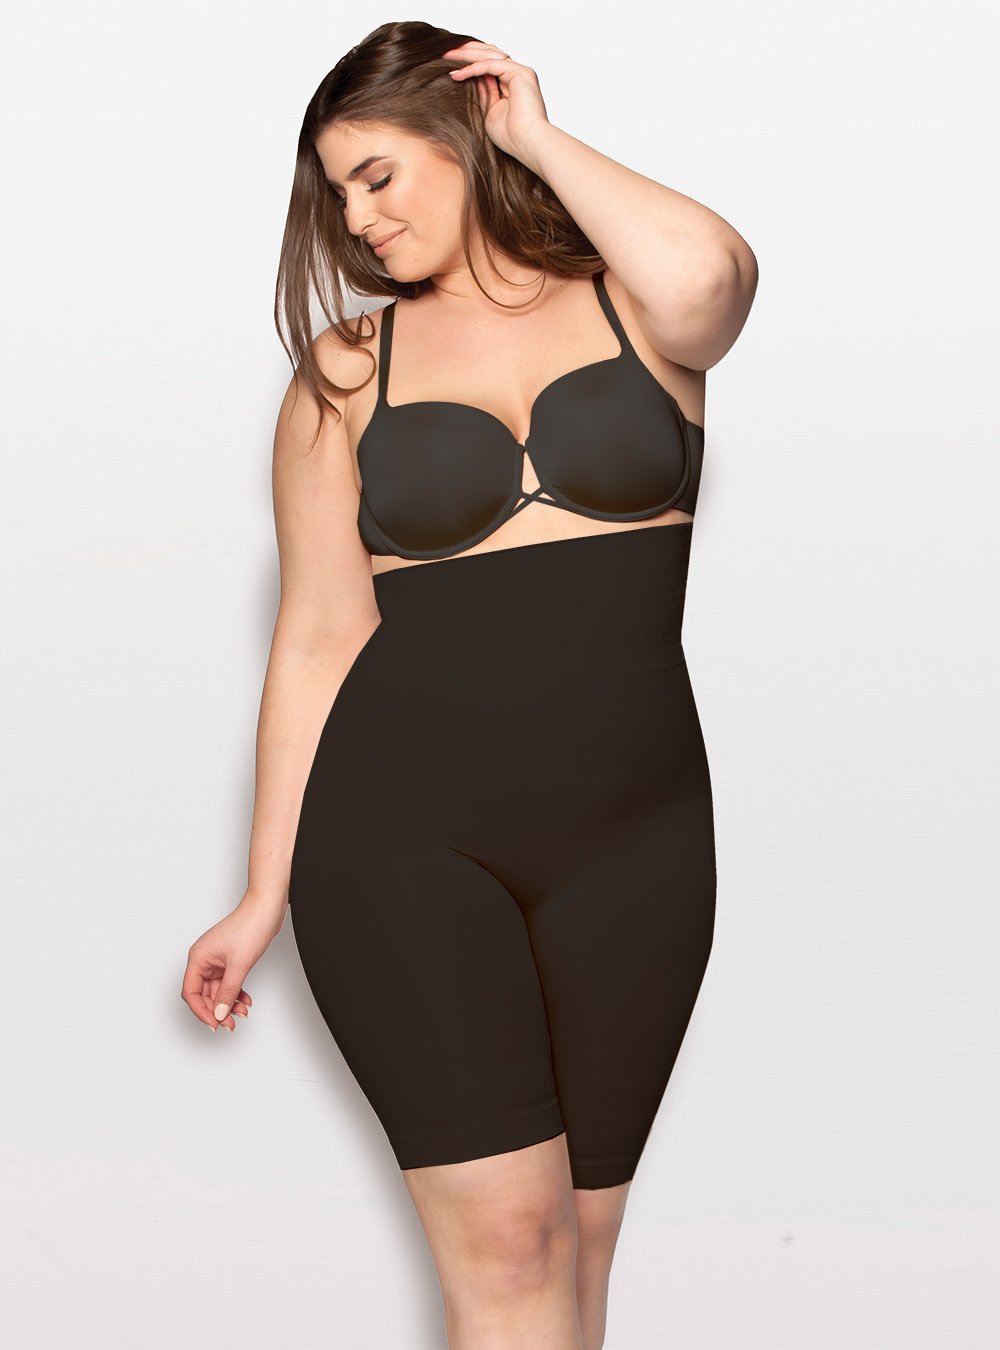 Body Hush BH1607 Sculptor All In One High Waisted Bodyshaper - Black -  Allure Intimate Apparel